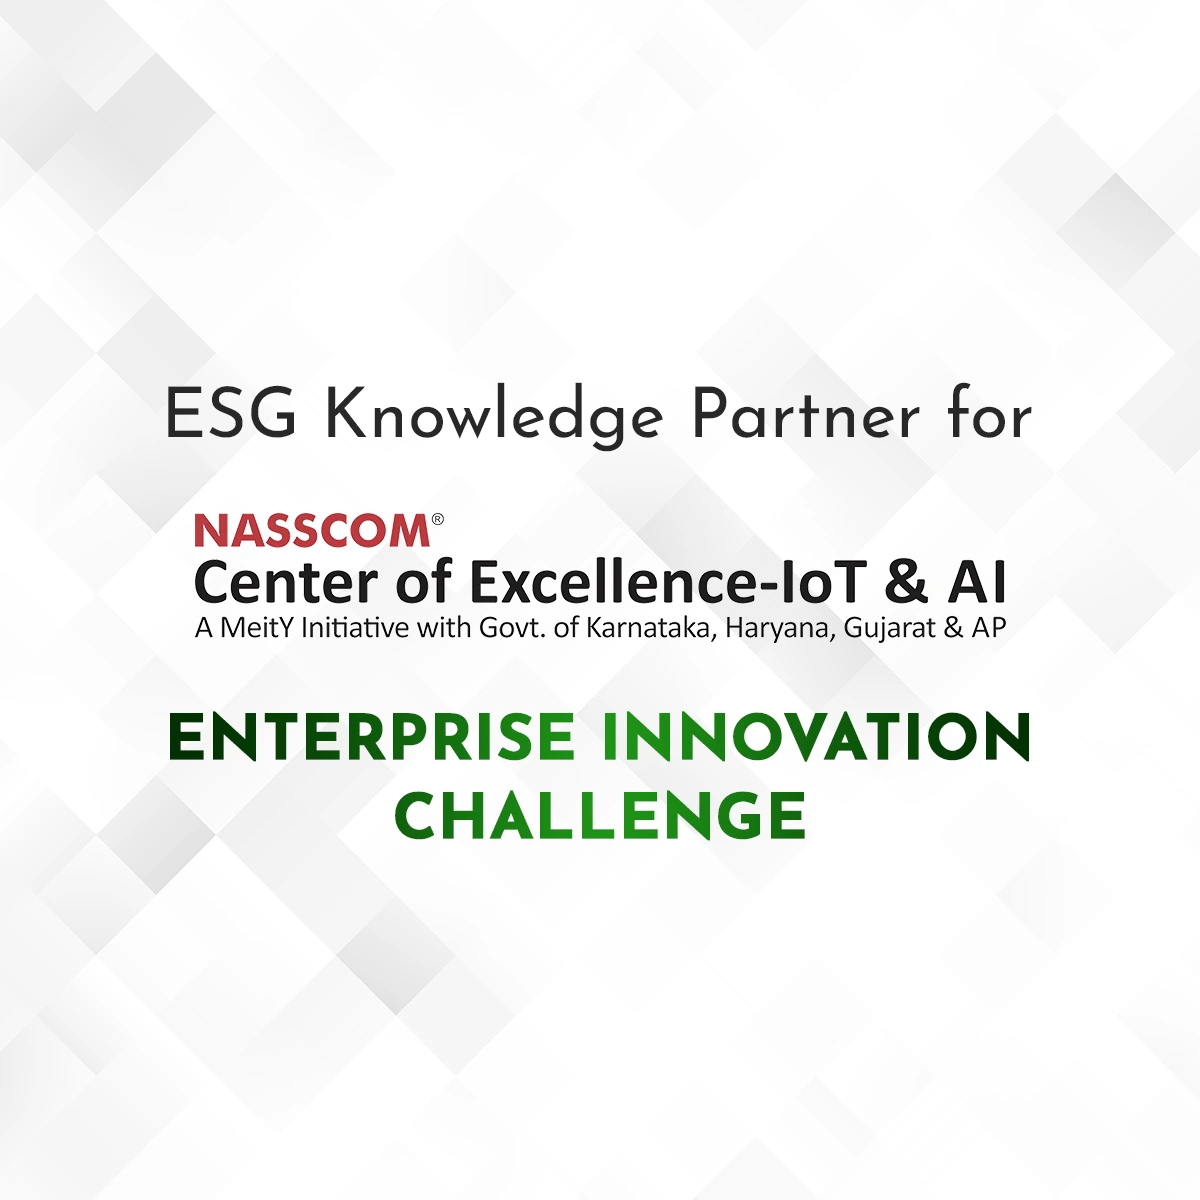 At Quest is the knowledge partner on ESG for this Innovation challenge in India